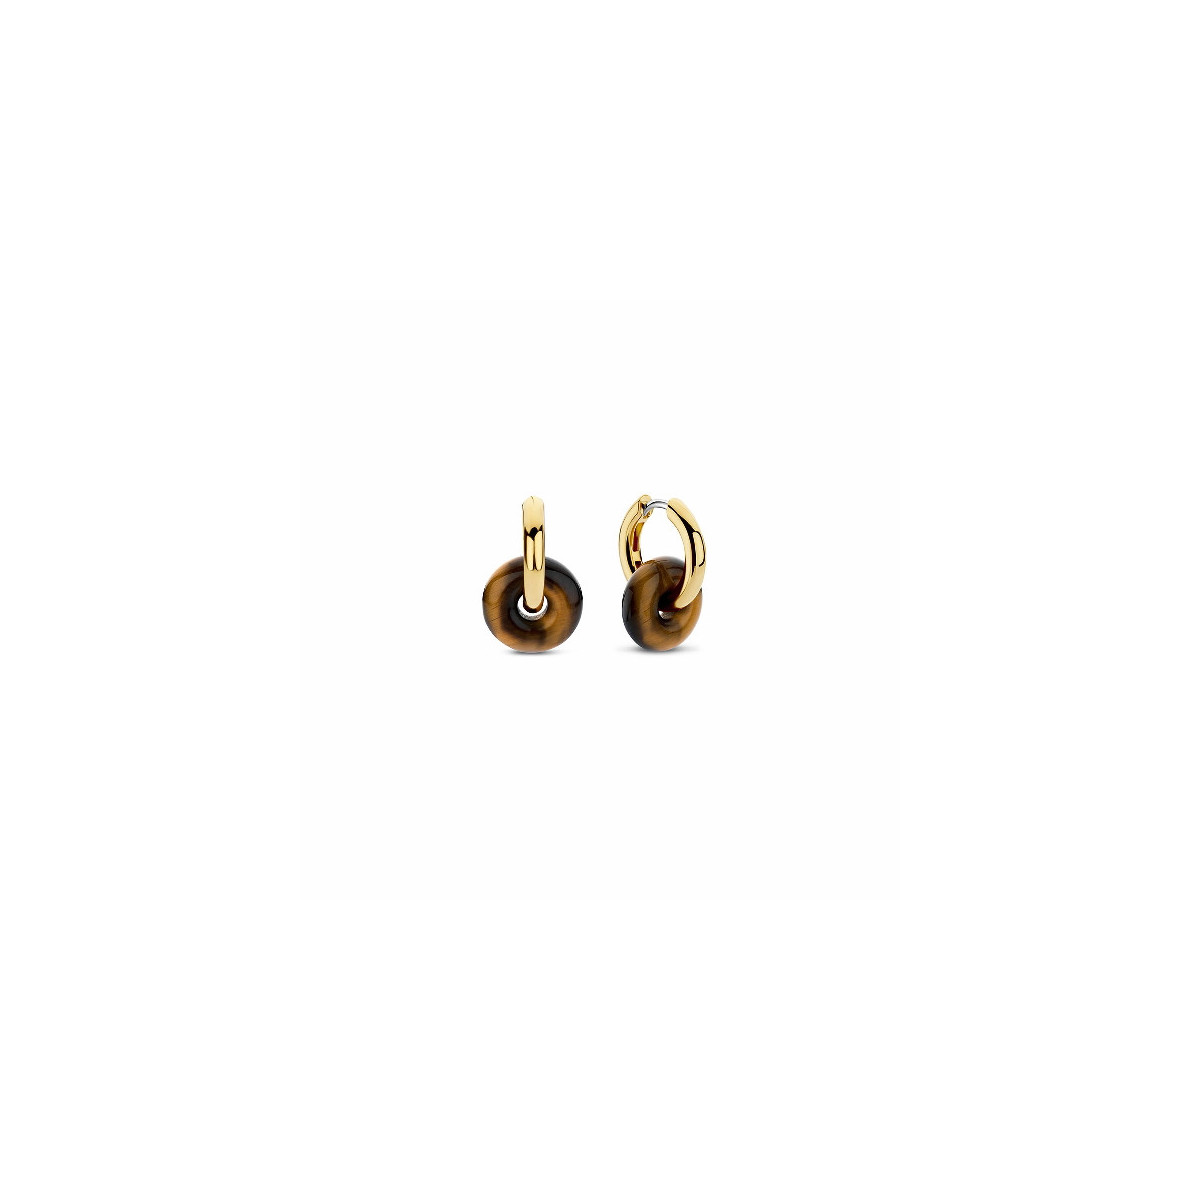 GOLD-PLATED SILVER AND TIGER'S EYE EARRINGS